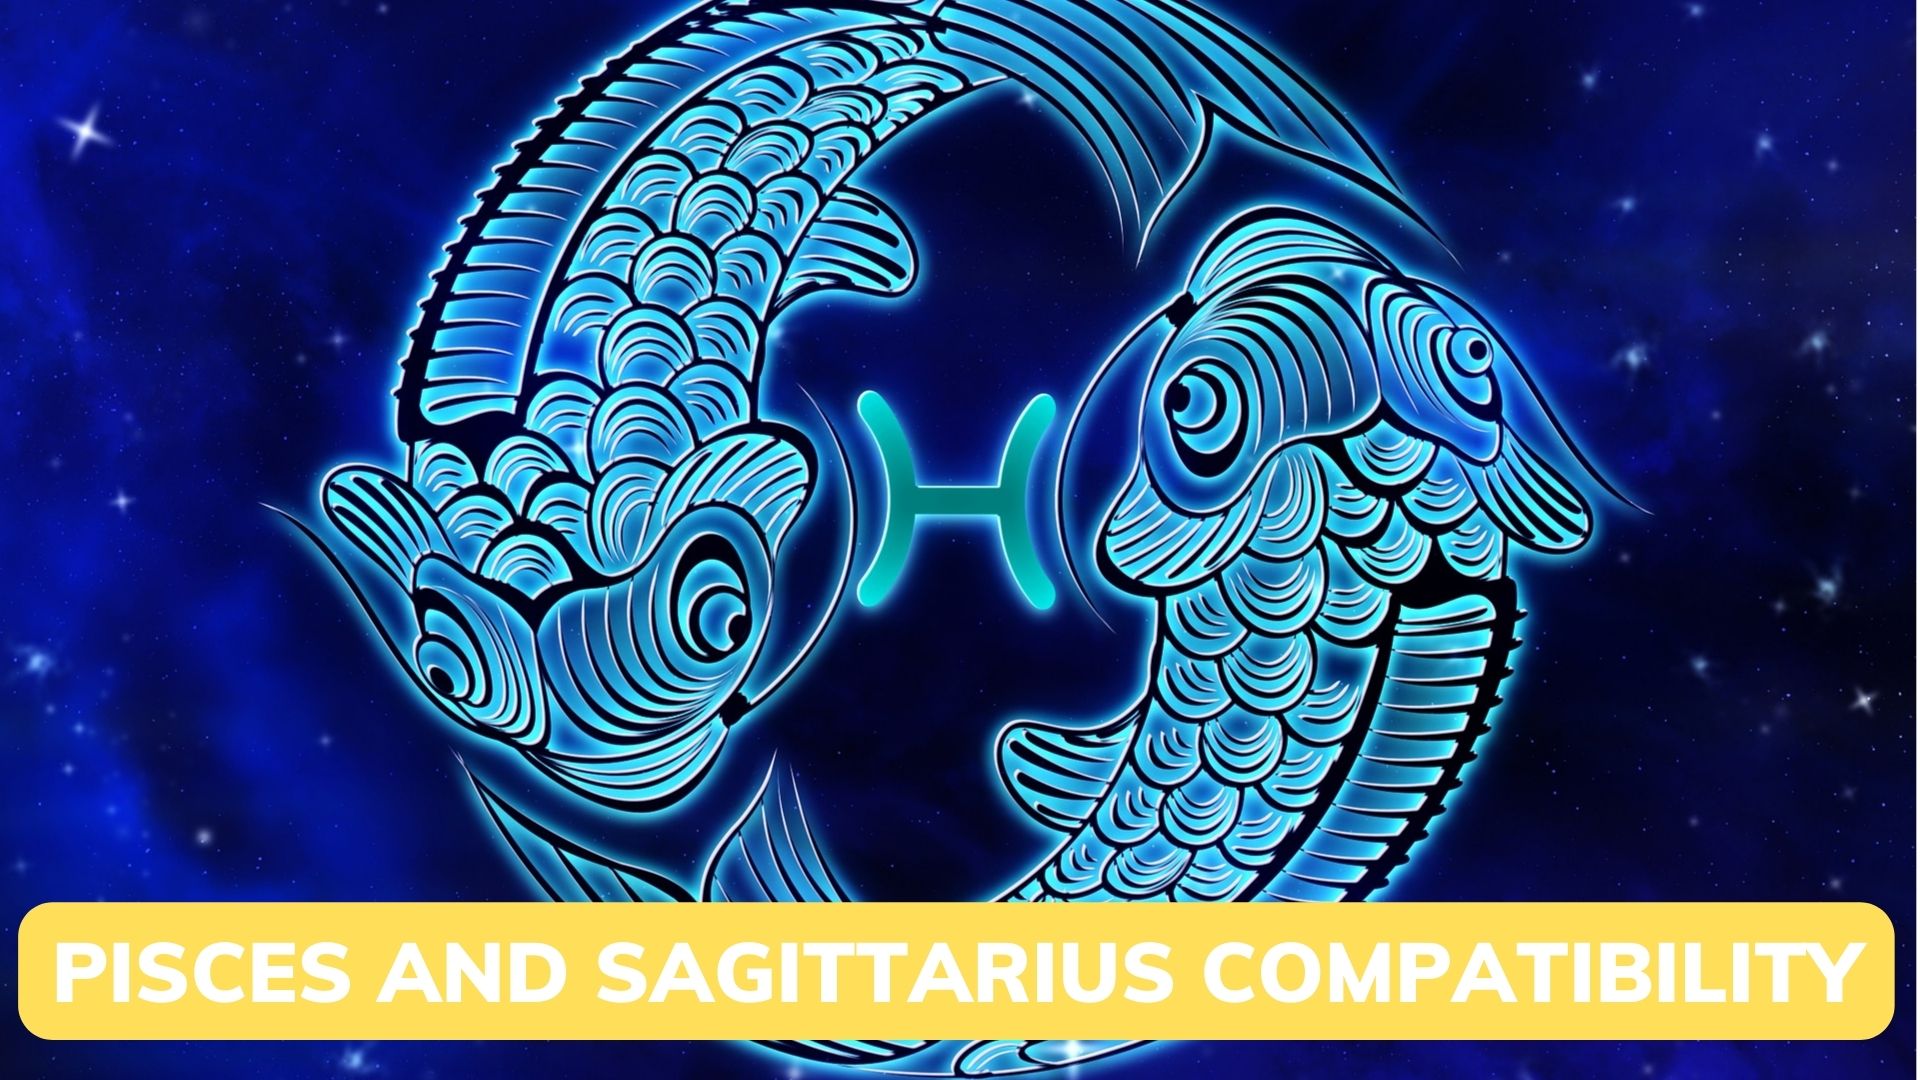 Pisces And Sagittarius Compatibility In Relationships, Marriage, And Sexuality